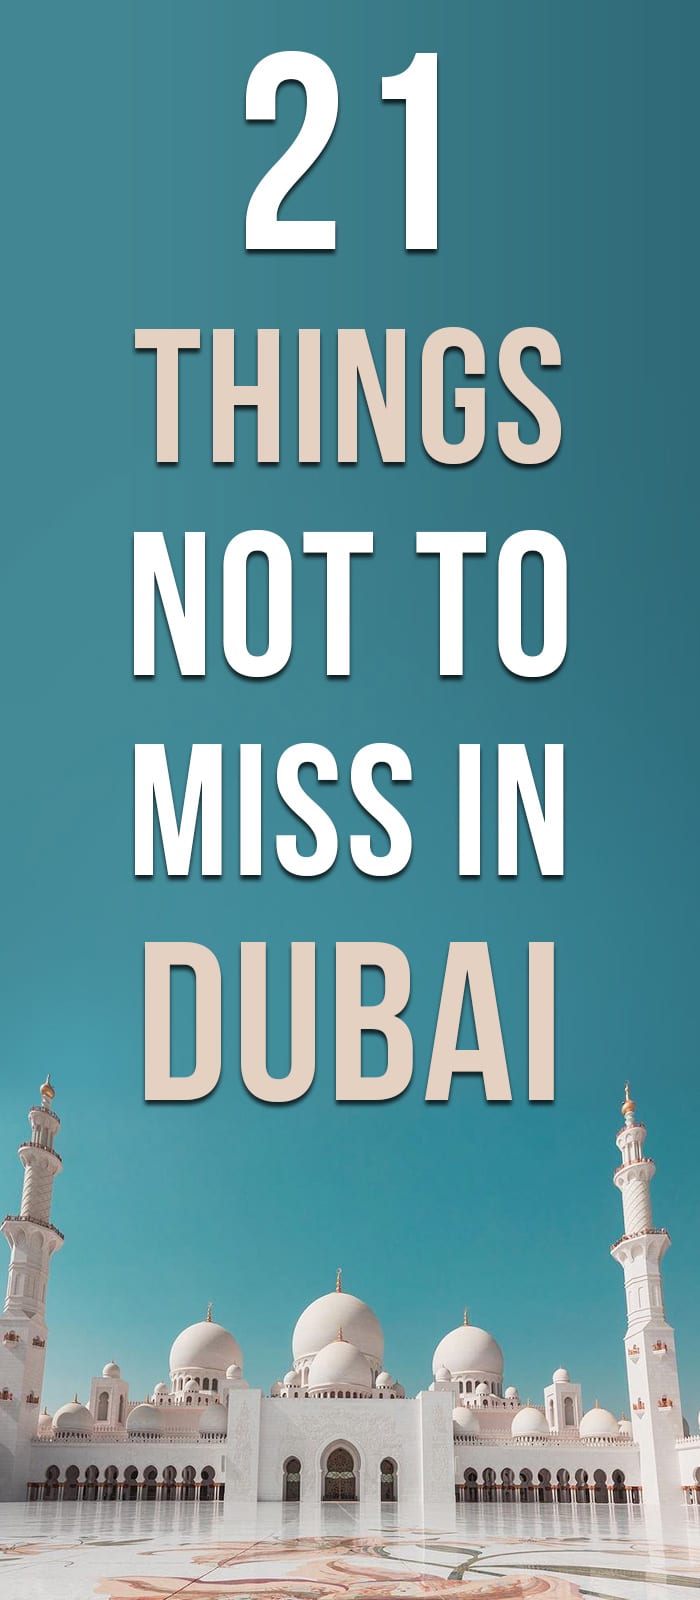 21 things not to miss in Dubai